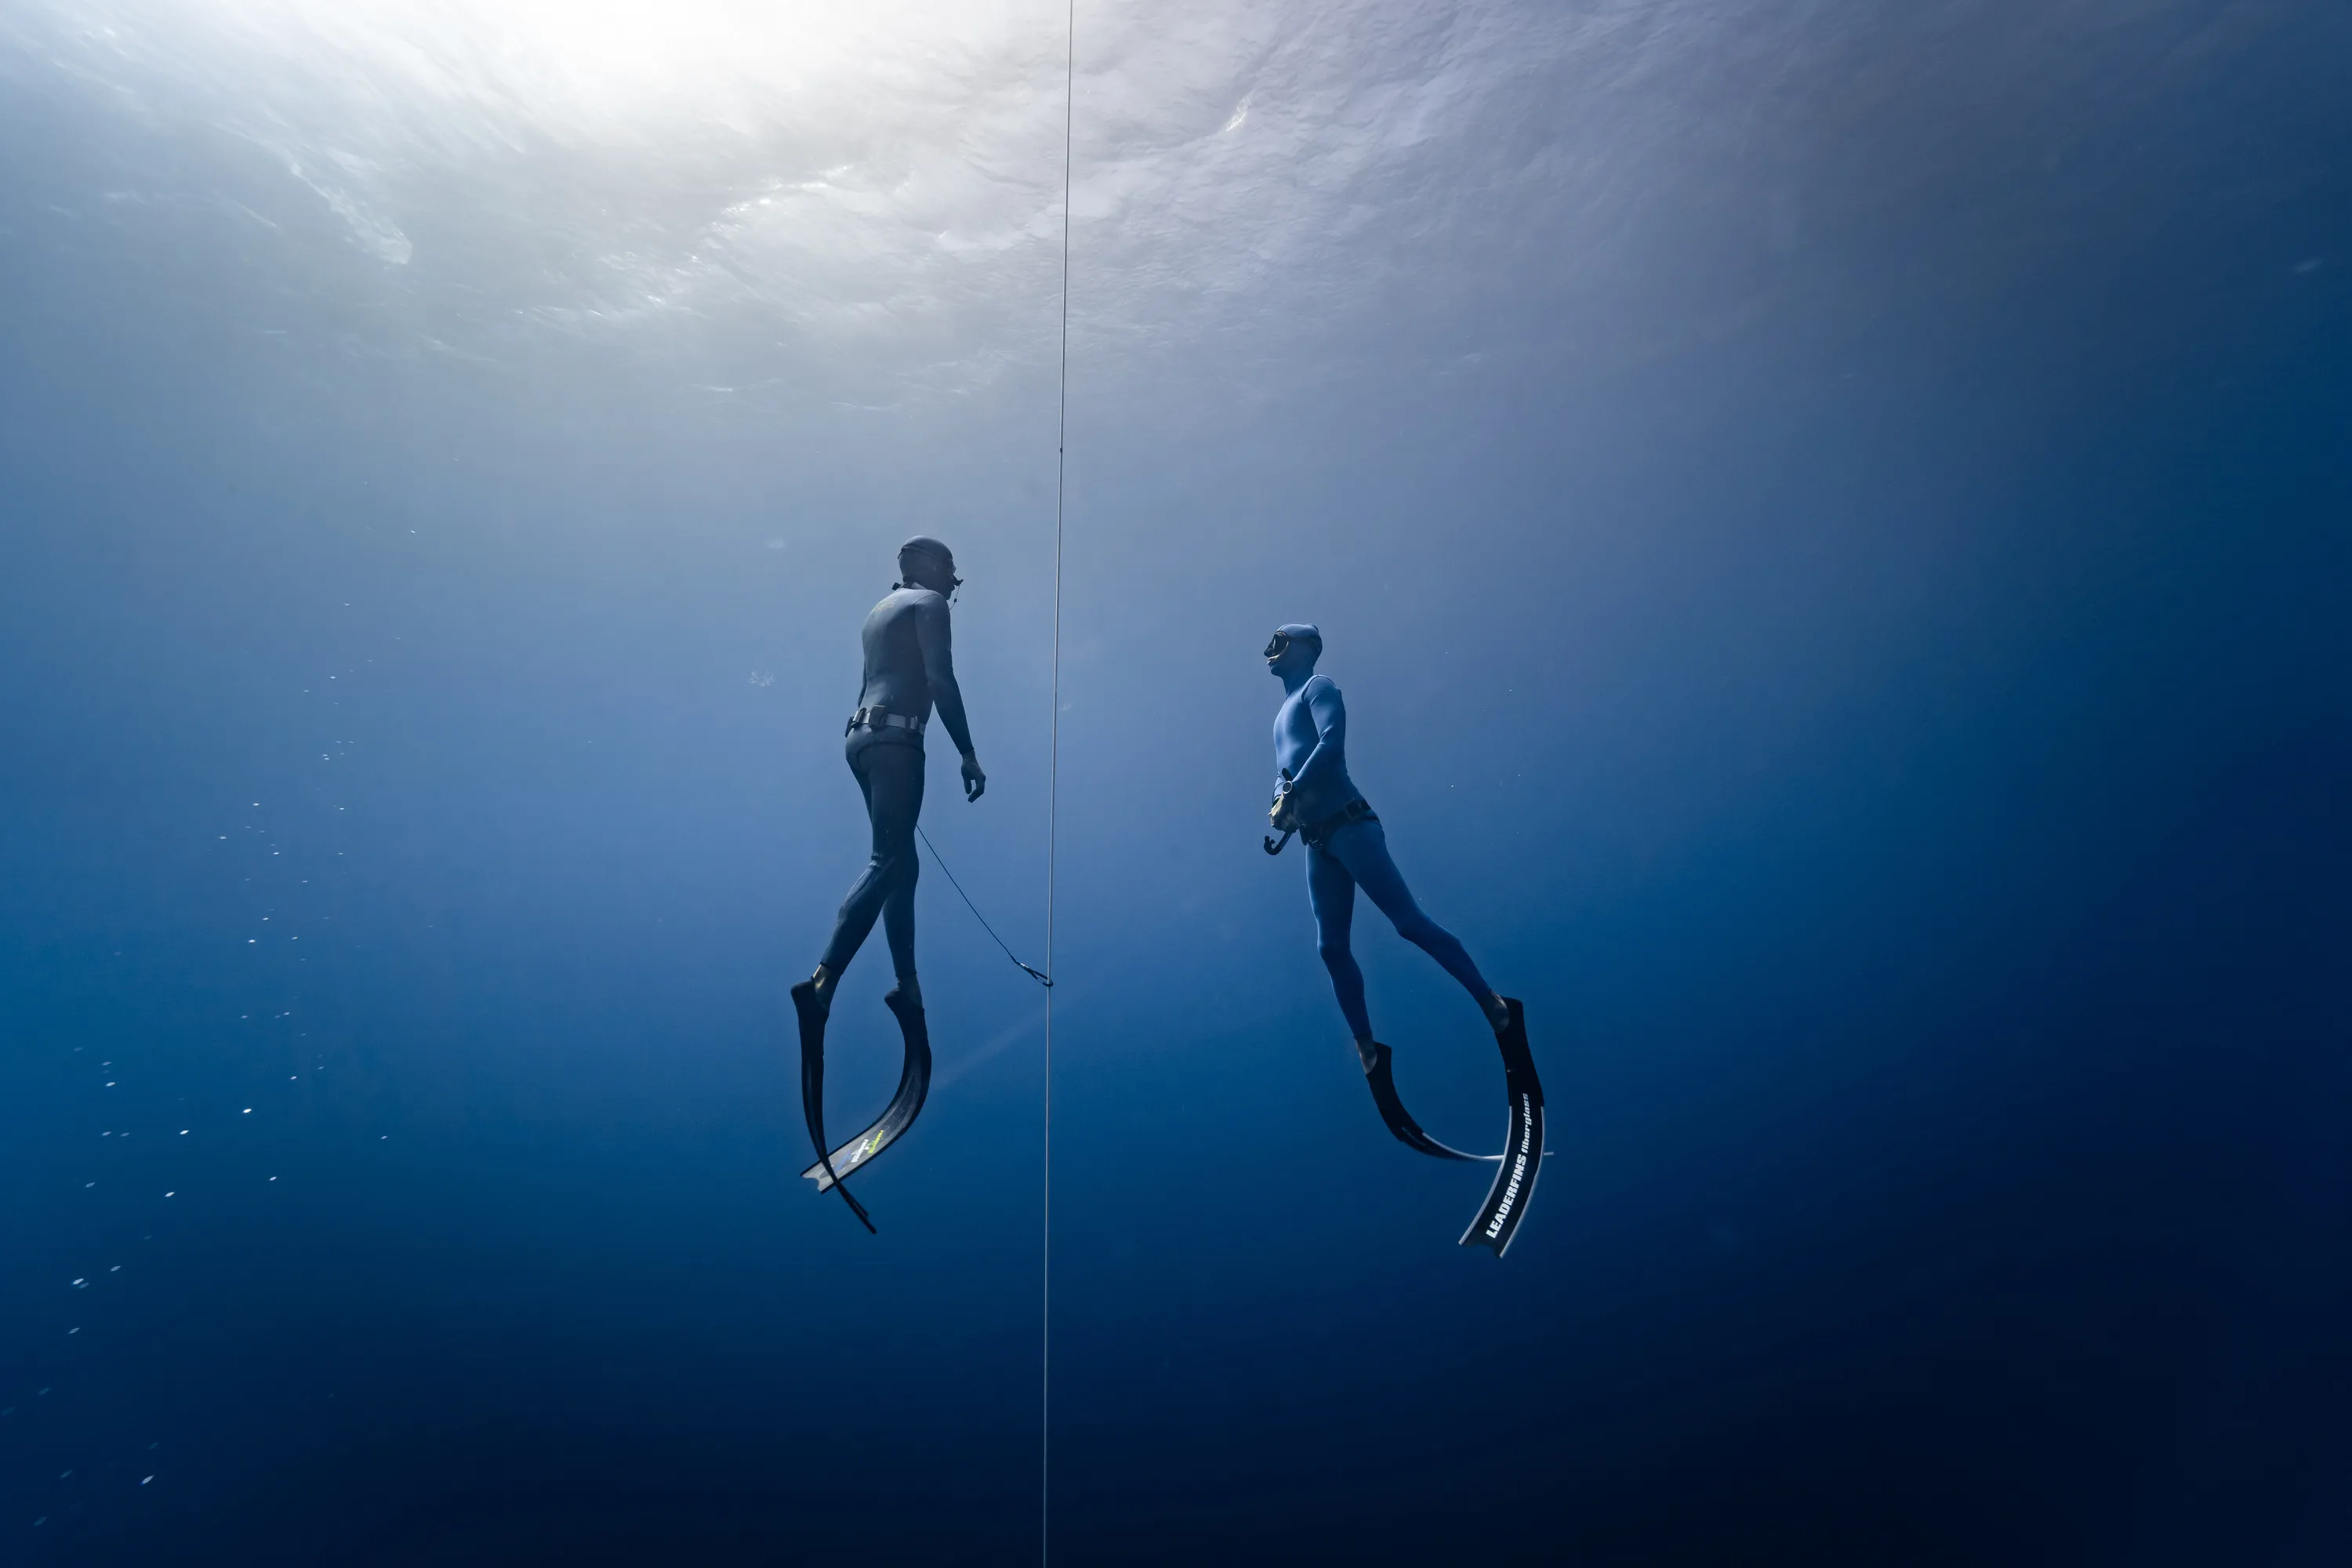 A freediver and his safety buddy are ascending from depth